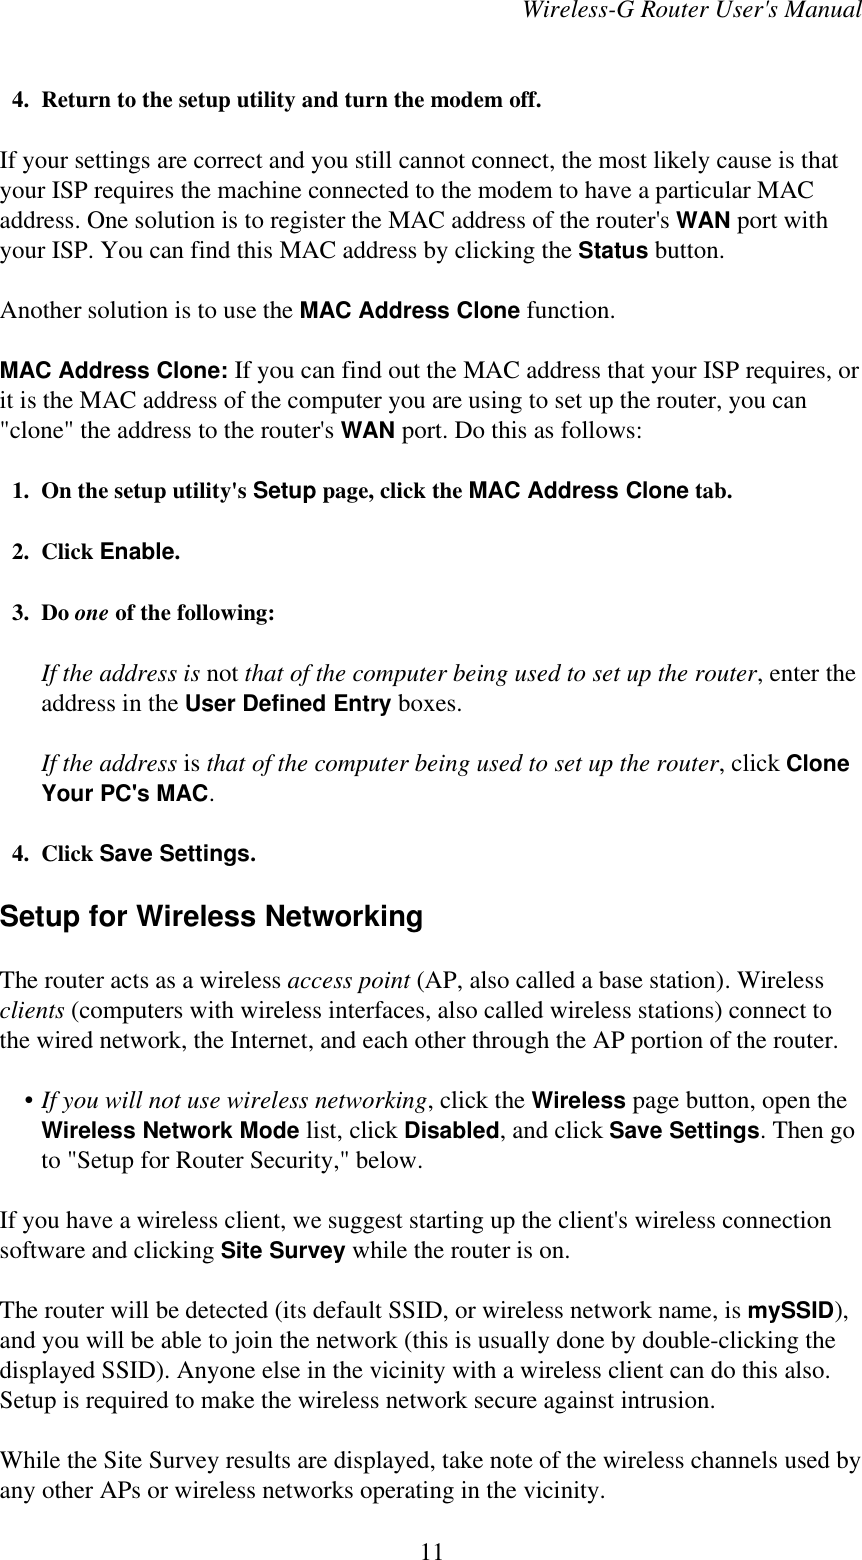 Wireless-G Router User&apos;s Manual  4. Return to the setup utility and turn the modem off.If your settings are correct and you still cannot connect, the most likely cause is thatyour ISP requires the machine connected to the modem to have a particular MACaddress. One solution is to register the MAC address of the router&apos;s WAN port withyour ISP. You can find this MAC address by clicking the Status button.Another solution is to use the MAC Address Clone function.MAC Address Clone: If you can find out the MAC address that your ISP requires, orit is the MAC address of the computer you are using to set up the router, you can&quot;clone&quot; the address to the router&apos;s WAN port. Do this as follows:  1. On the setup utility&apos;s Setup page, click the MAC Address Clone tab.  2. Click Enable.  3. Do one of the following:If the address is not that of the computer being used to set up the router, enter theaddress in the User Defined Entry boxes.If the address is that of the computer being used to set up the router, click CloneYour PC&apos;s MAC.  4. Click Save Settings.Setup for Wireless NetworkingThe router acts as a wireless access point (AP, also called a base station). Wirelessclients (computers with wireless interfaces, also called wireless stations) connect tothe wired network, the Internet, and each other through the AP portion of the router.    • If you will not use wireless networking, click the Wireless page button, open theWireless Network Mode list, click Disabled, and click Save Settings. Then goto &quot;Setup for Router Security,&quot; below.If you have a wireless client, we suggest starting up the client&apos;s wireless connectionsoftware and clicking Site Survey while the router is on.The router will be detected (its default SSID, or wireless network name, is mySSID),and you will be able to join the network (this is usually done by double-clicking thedisplayed SSID). Anyone else in the vicinity with a wireless client can do this also.Setup is required to make the wireless network secure against intrusion.While the Site Survey results are displayed, take note of the wireless channels used byany other APs or wireless networks operating in the vicinity.11